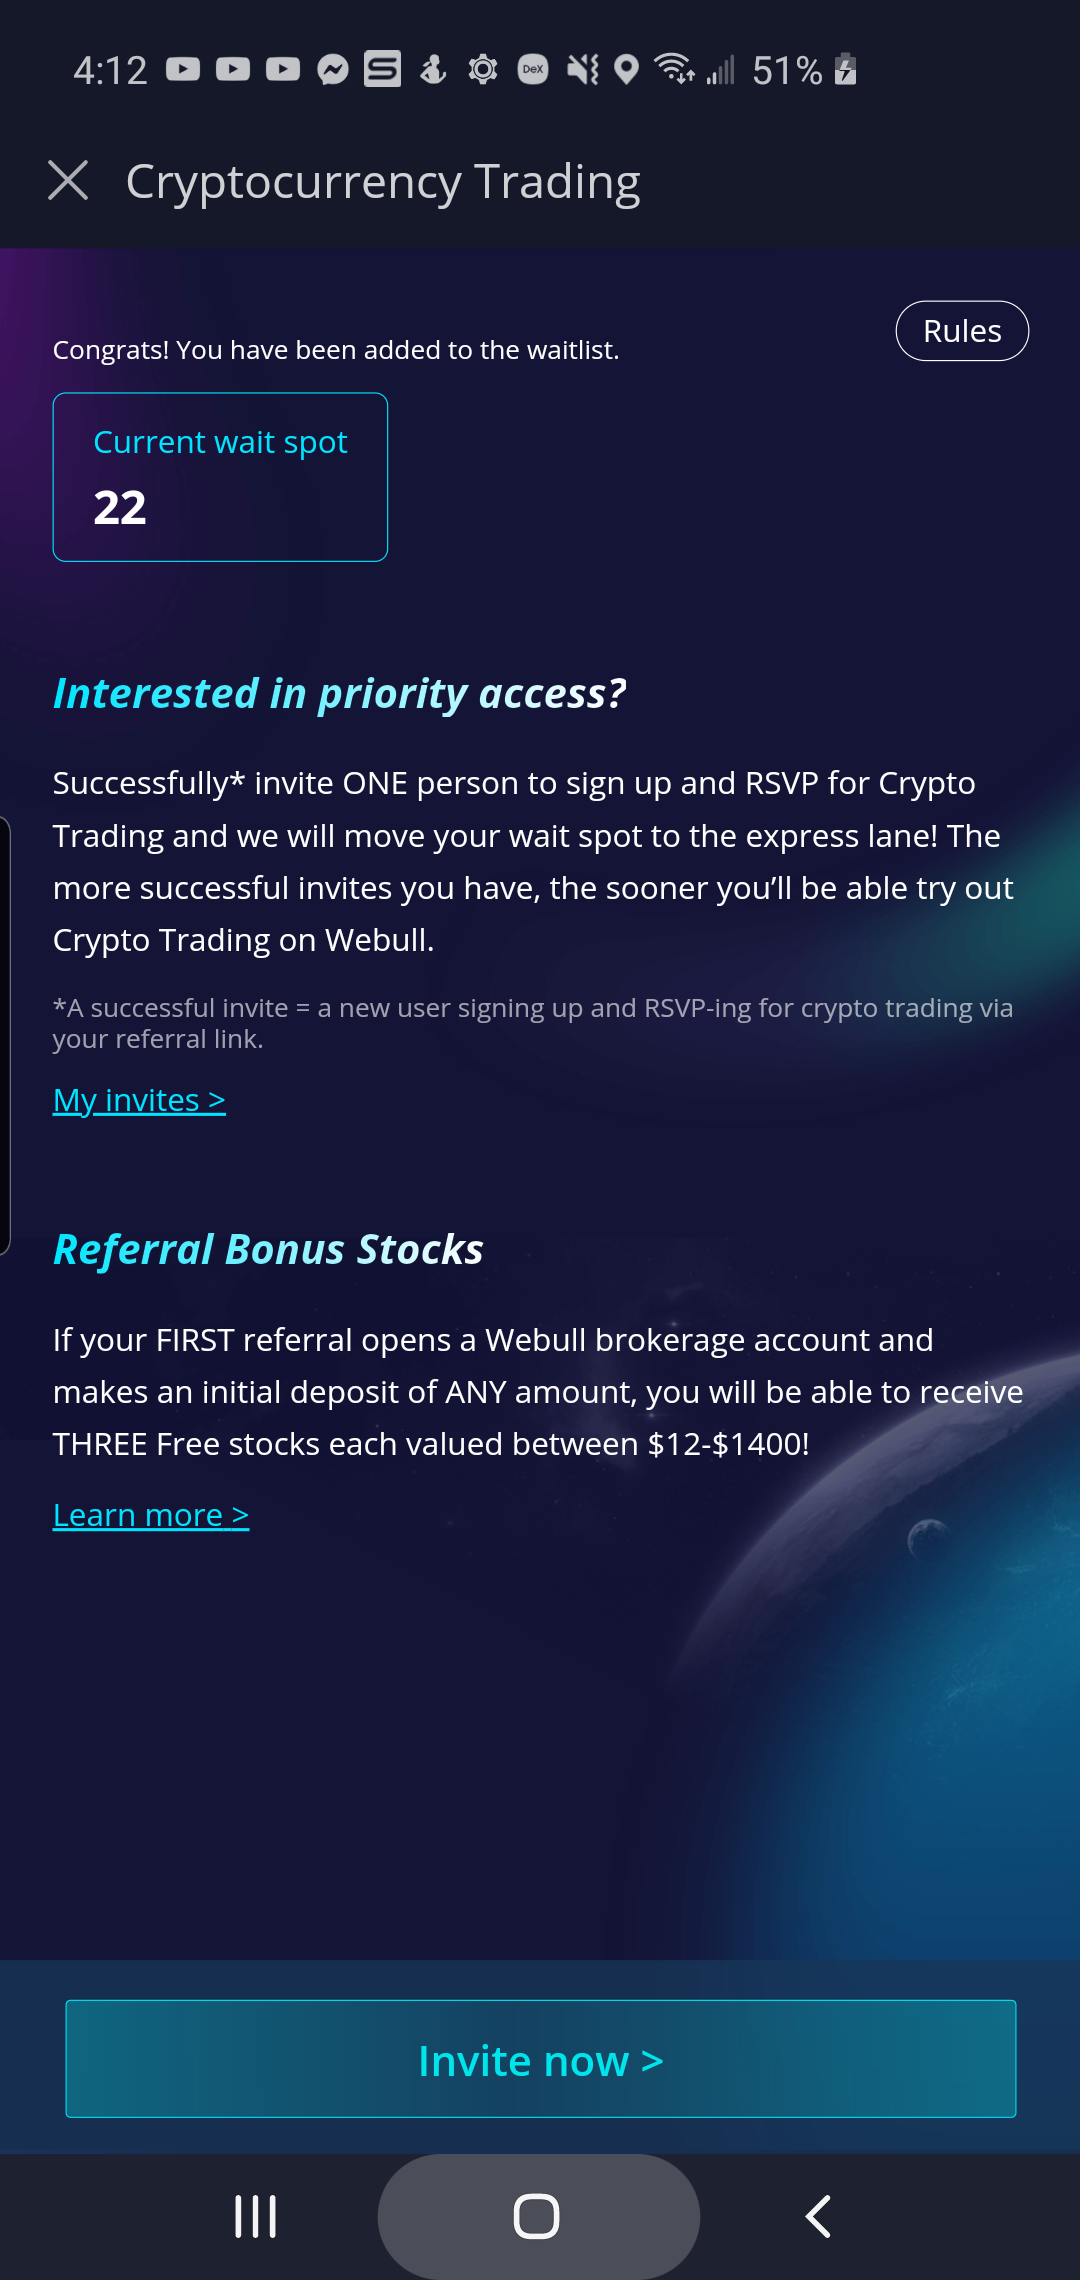 Can You Trade Crypto On Webull After Hours - Applying For Cryptocurrency Trading This Seems Sketchy Does Anyone Agree Webull - During our testing, we were only able to place crypto trades on webull's mobile app and browser platform (after updating the desktop software to the latest version, we still could not place crypto trades).